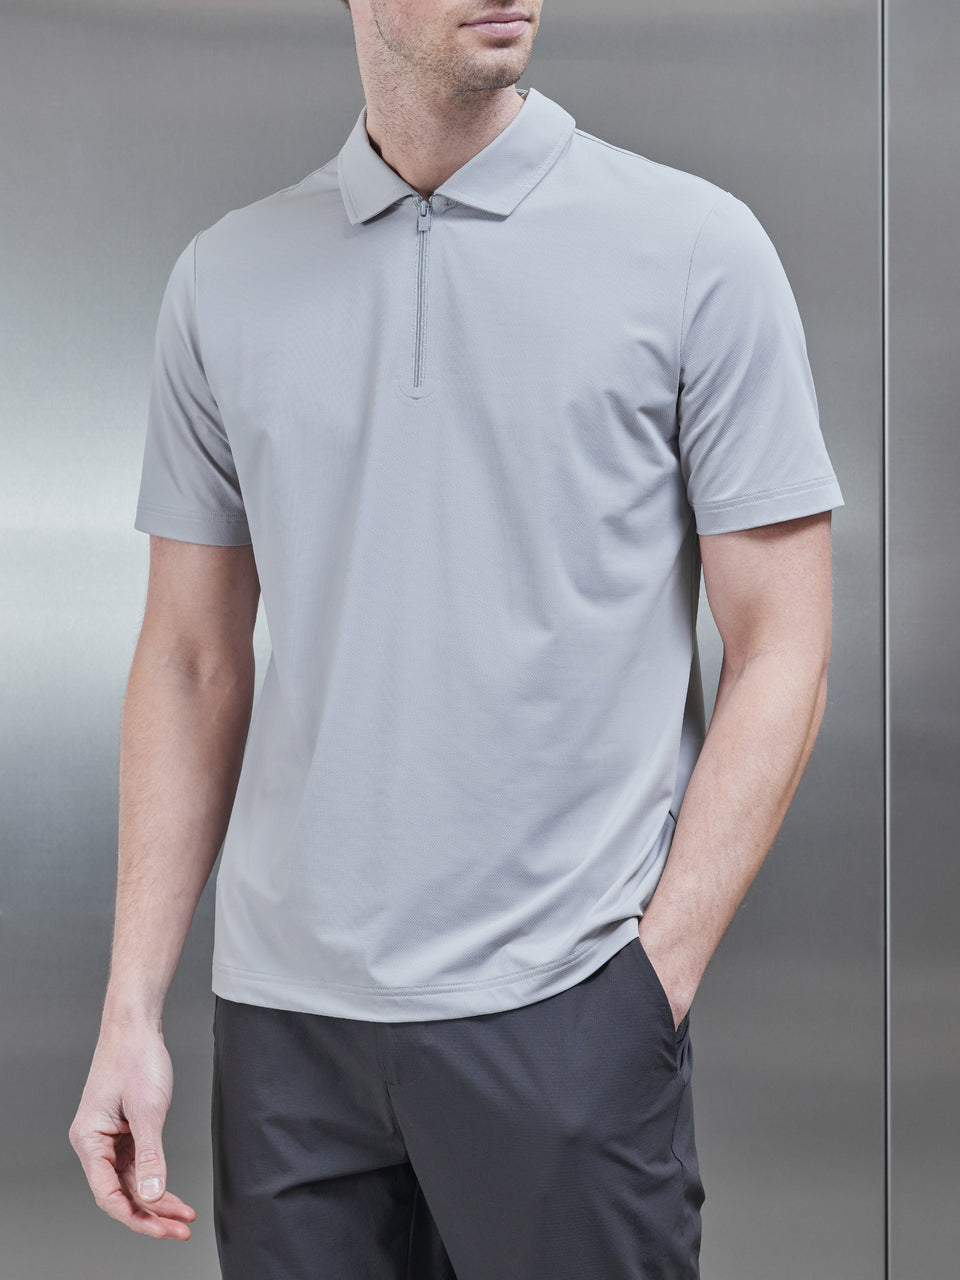 Technical Zip Polo Shirt in Mid Grey